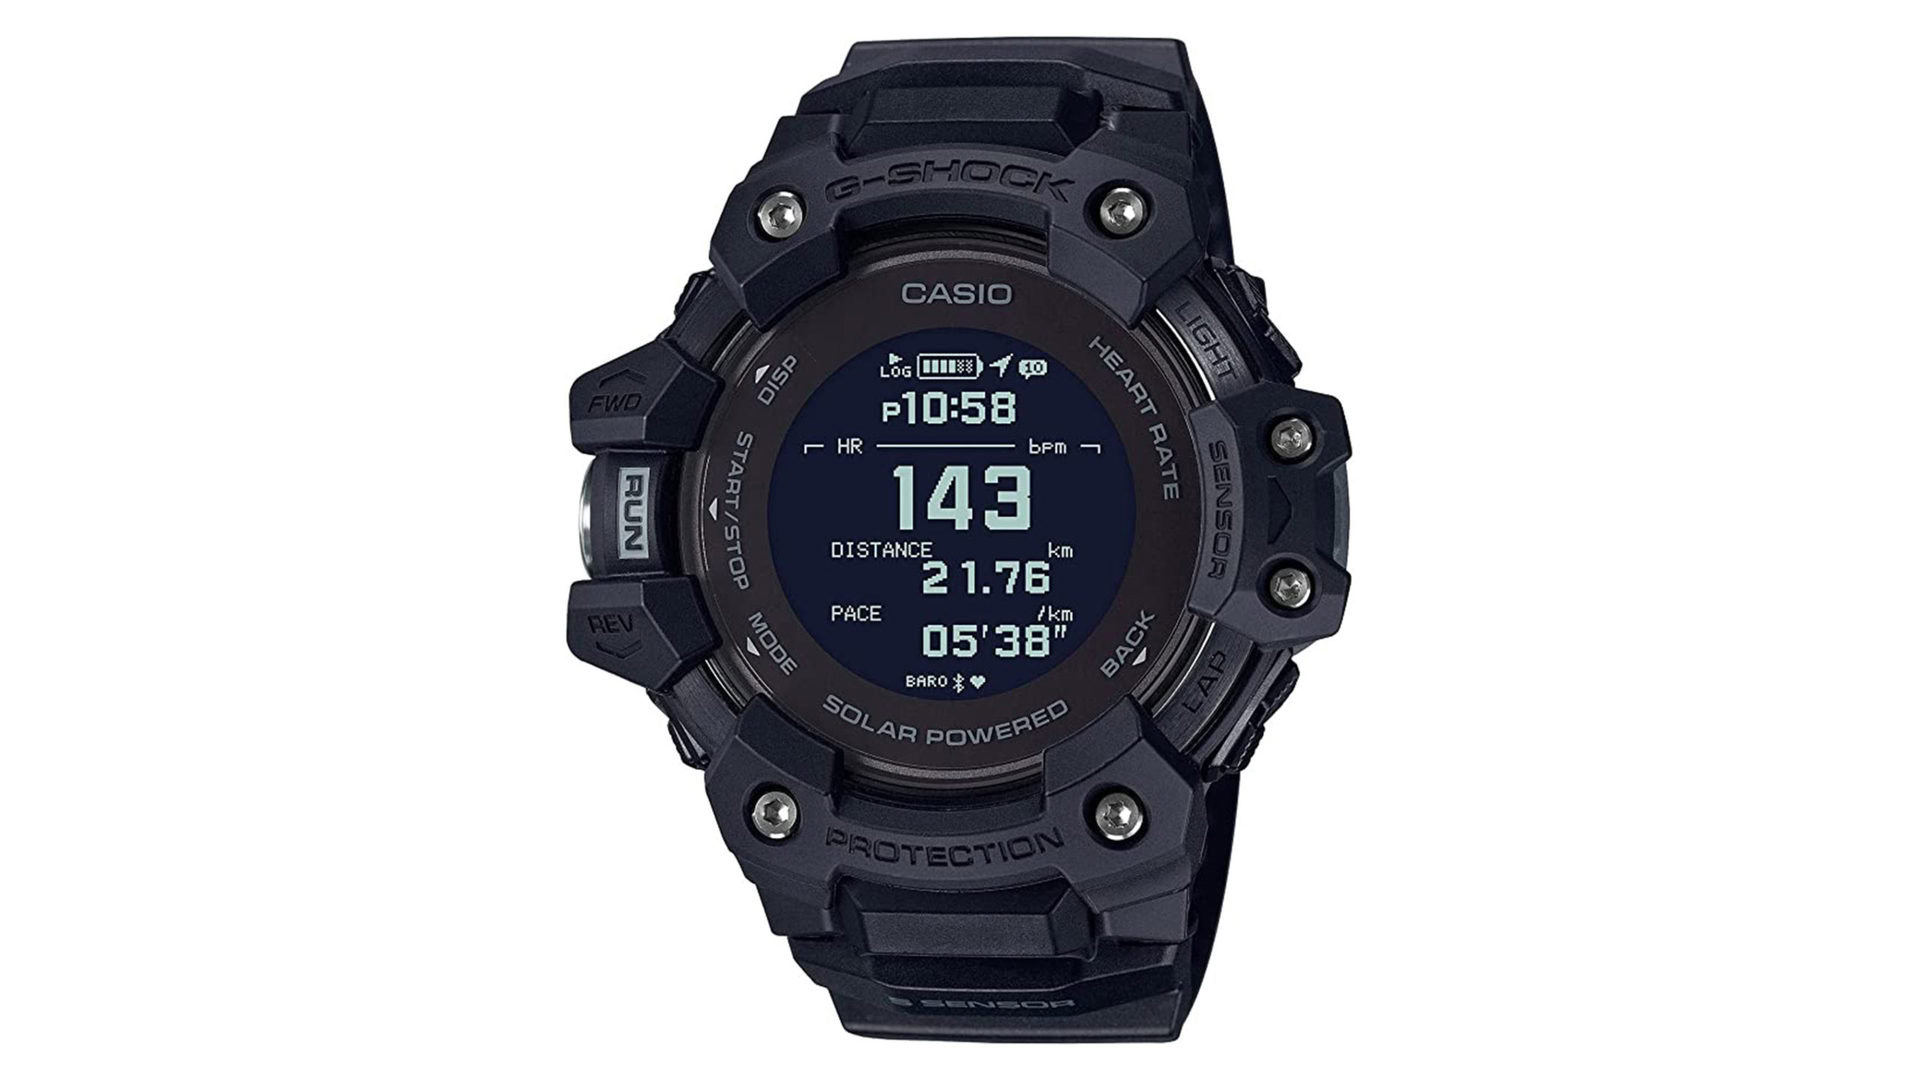 A product image shows a Casio GBDH 1000 1 in black.